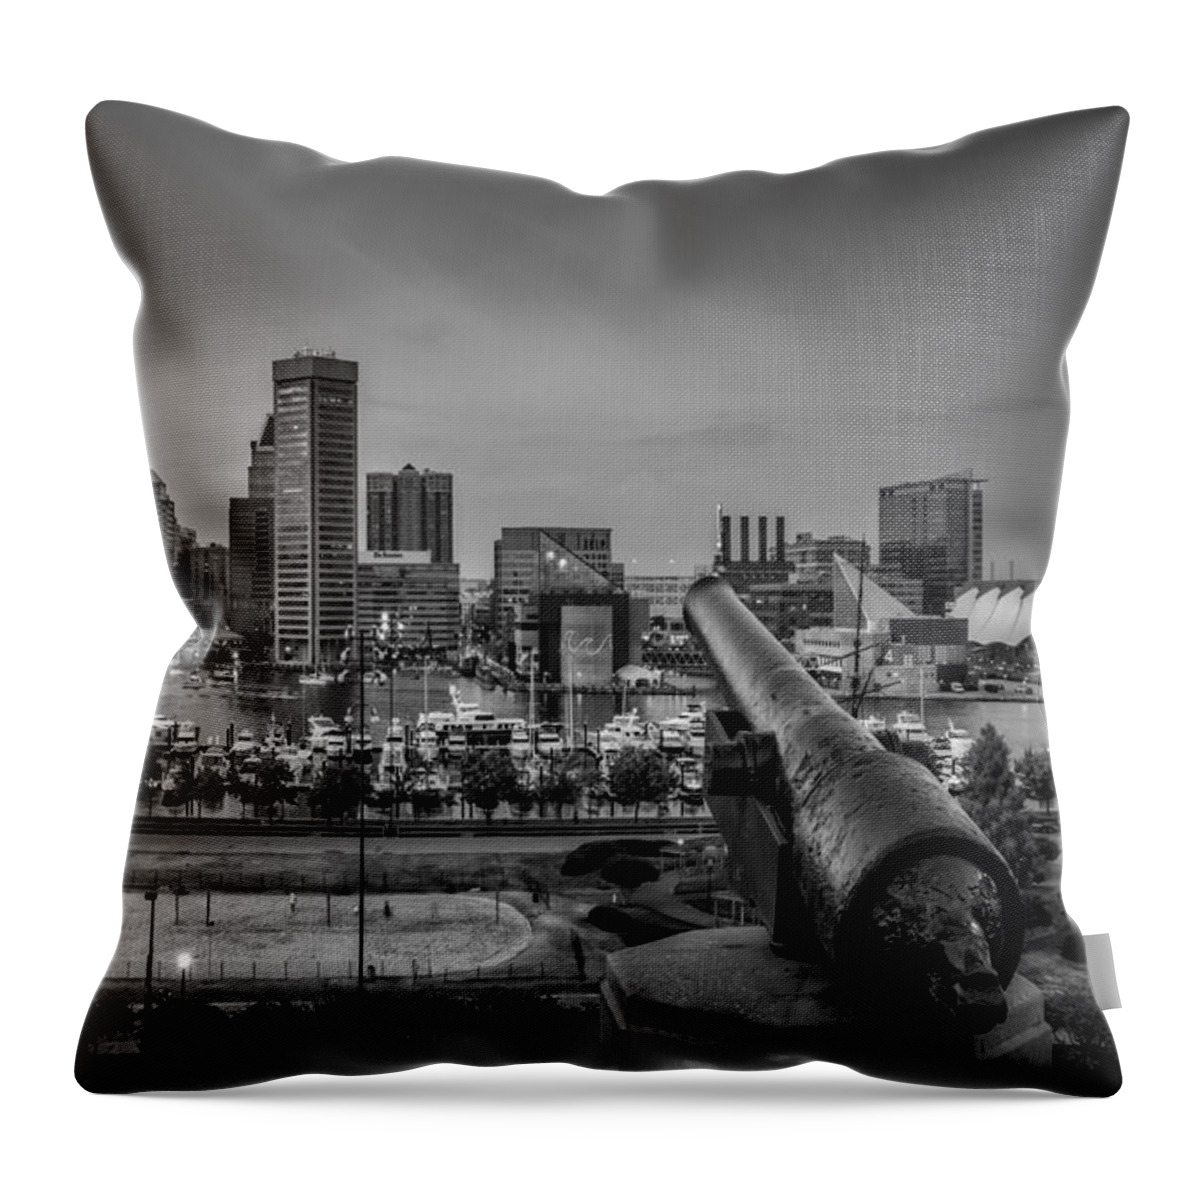 Baltimore Throw Pillow featuring the photograph Federal Hill In Baltimore Maryland by Susan Candelario